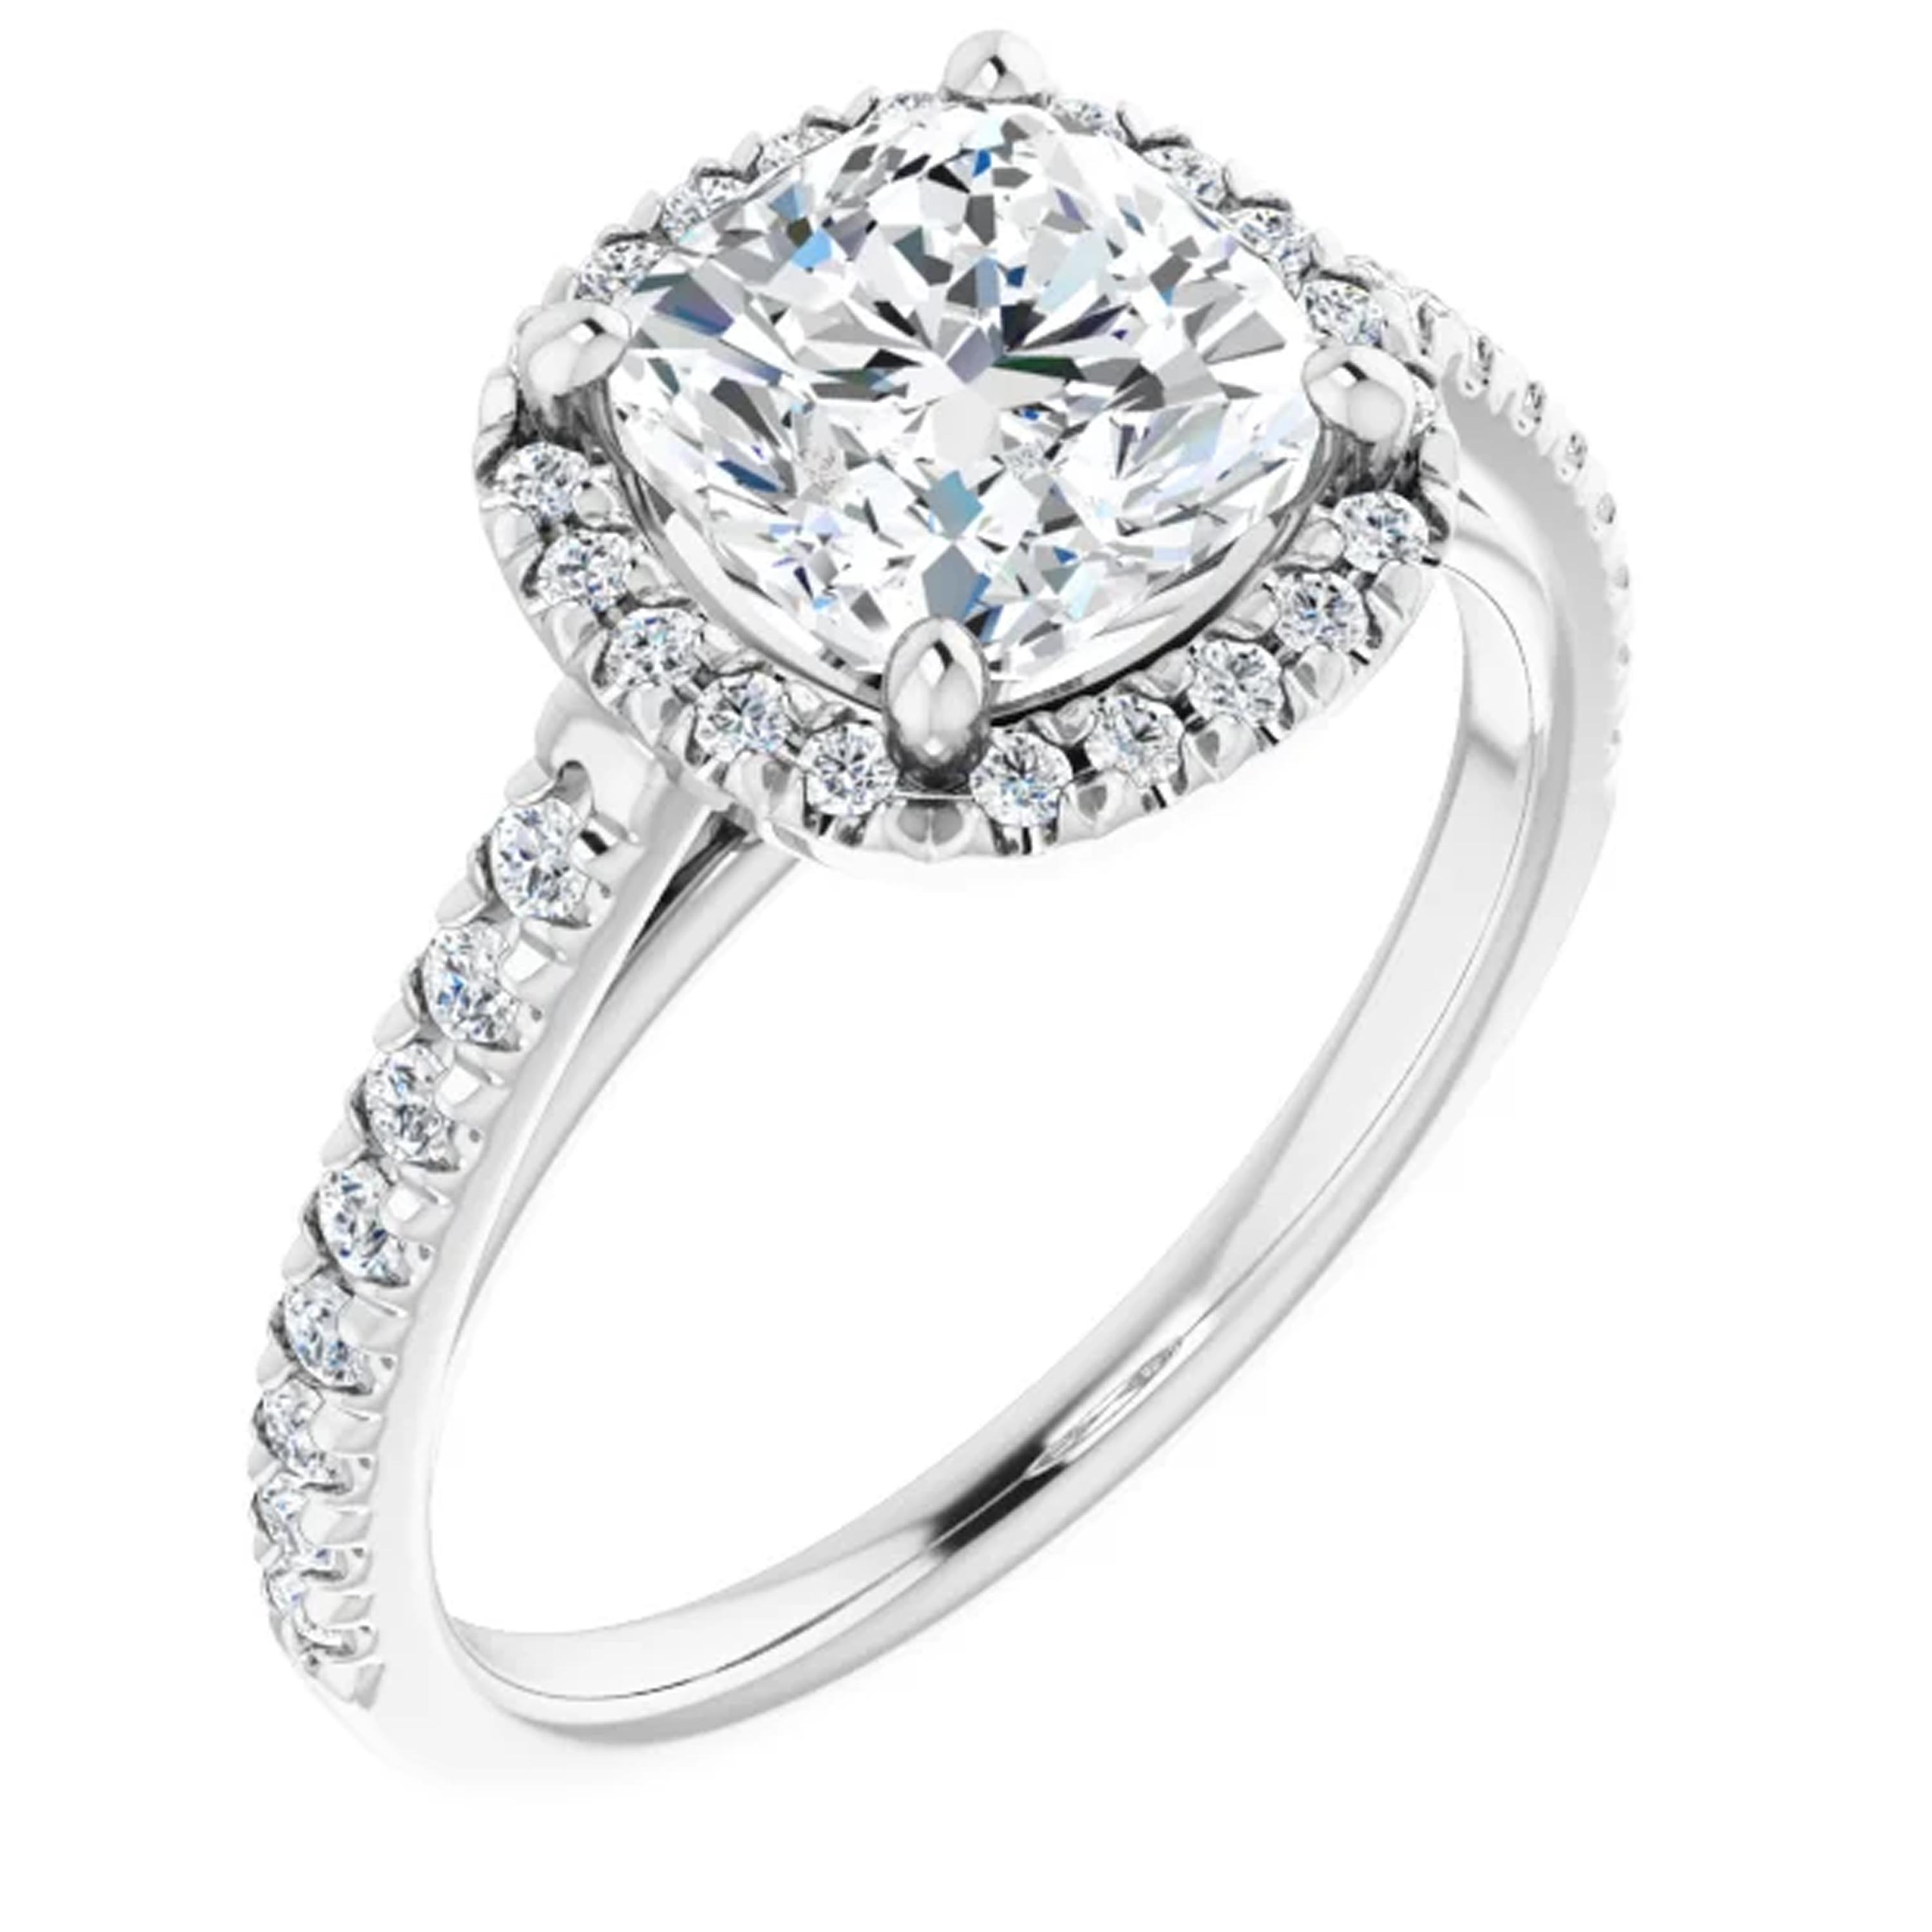 Surrounded by a halo of white shimmering diamonds, the cushion cut GIA certified diamond shines brilliantly in the center. Additional diamonds line the shank of this glamorous engagement ring. Complementing the wedding ring, a dainty matching